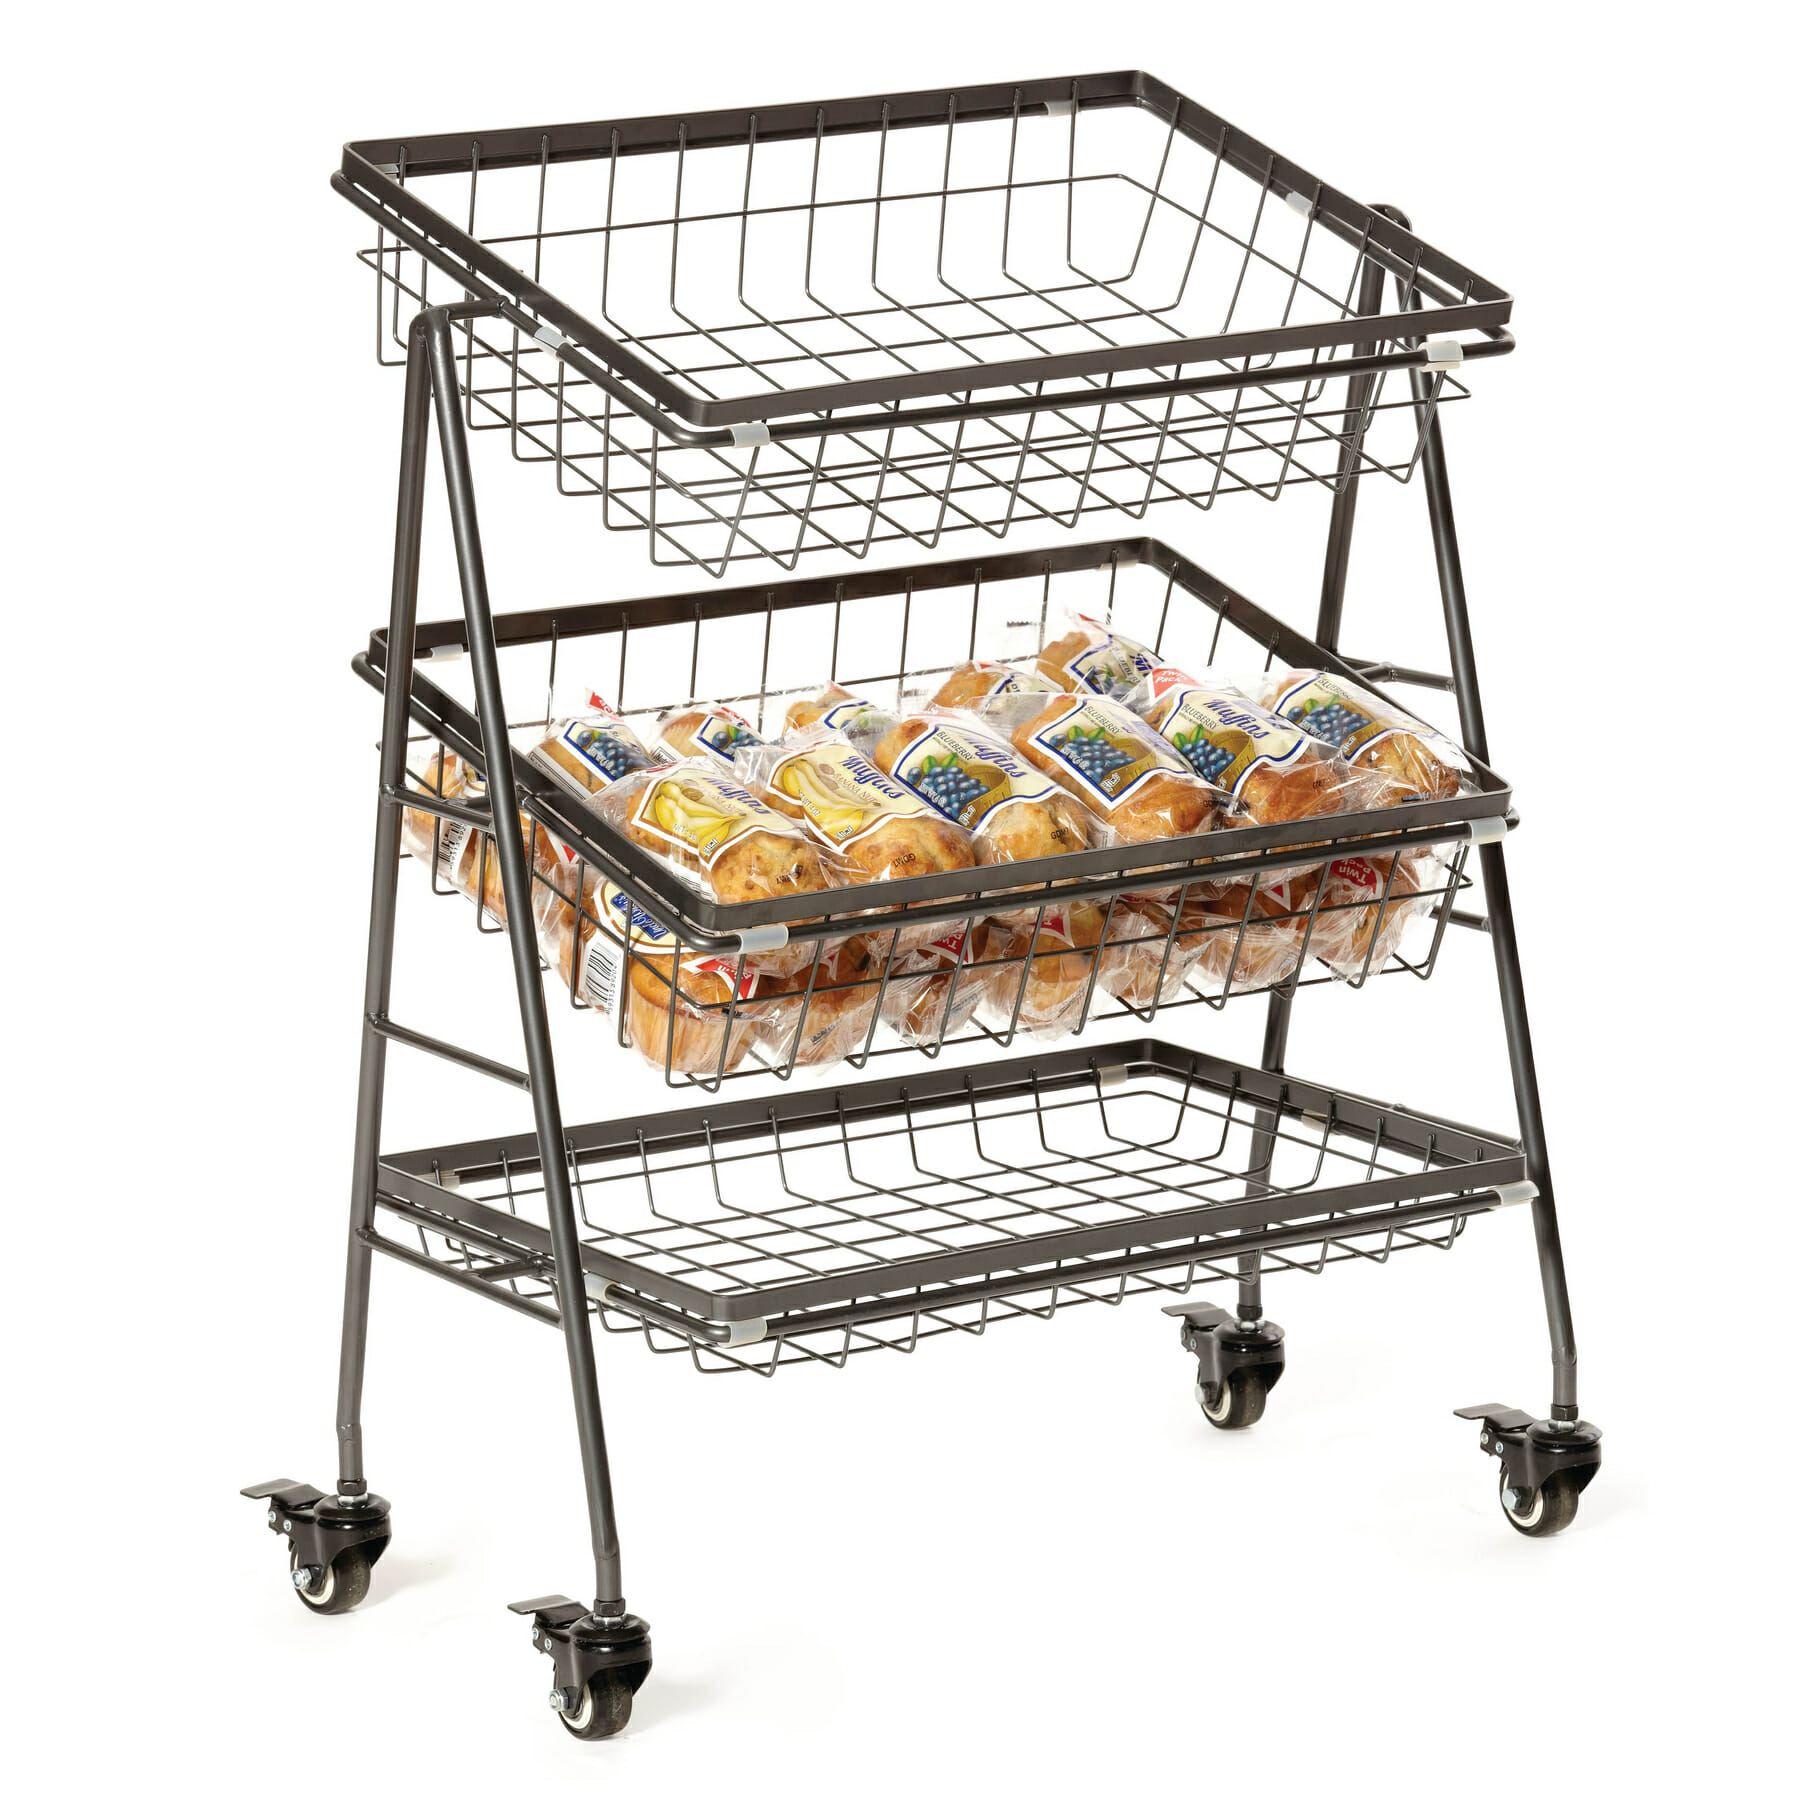 21.5" x 12.25" Rectangular 3-Tier Mobile Merchandiser Stand with Wheels, 25.75" tall (fits WB-1812, WB-1814, WB-1812WD, WB-1814WD)